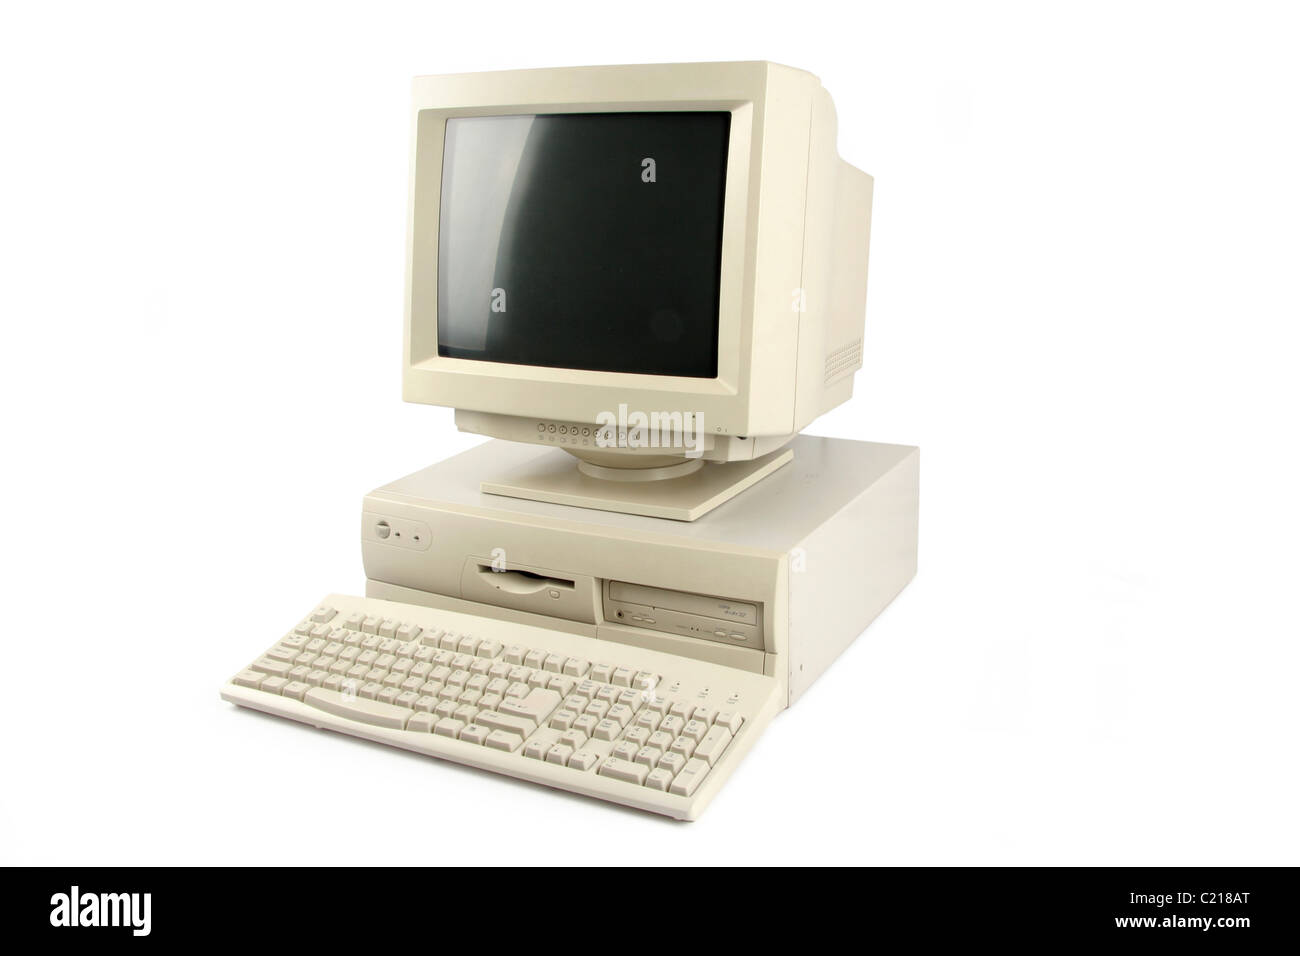 isolated old desktop computer Stock Photo: 35678576 - Alamy